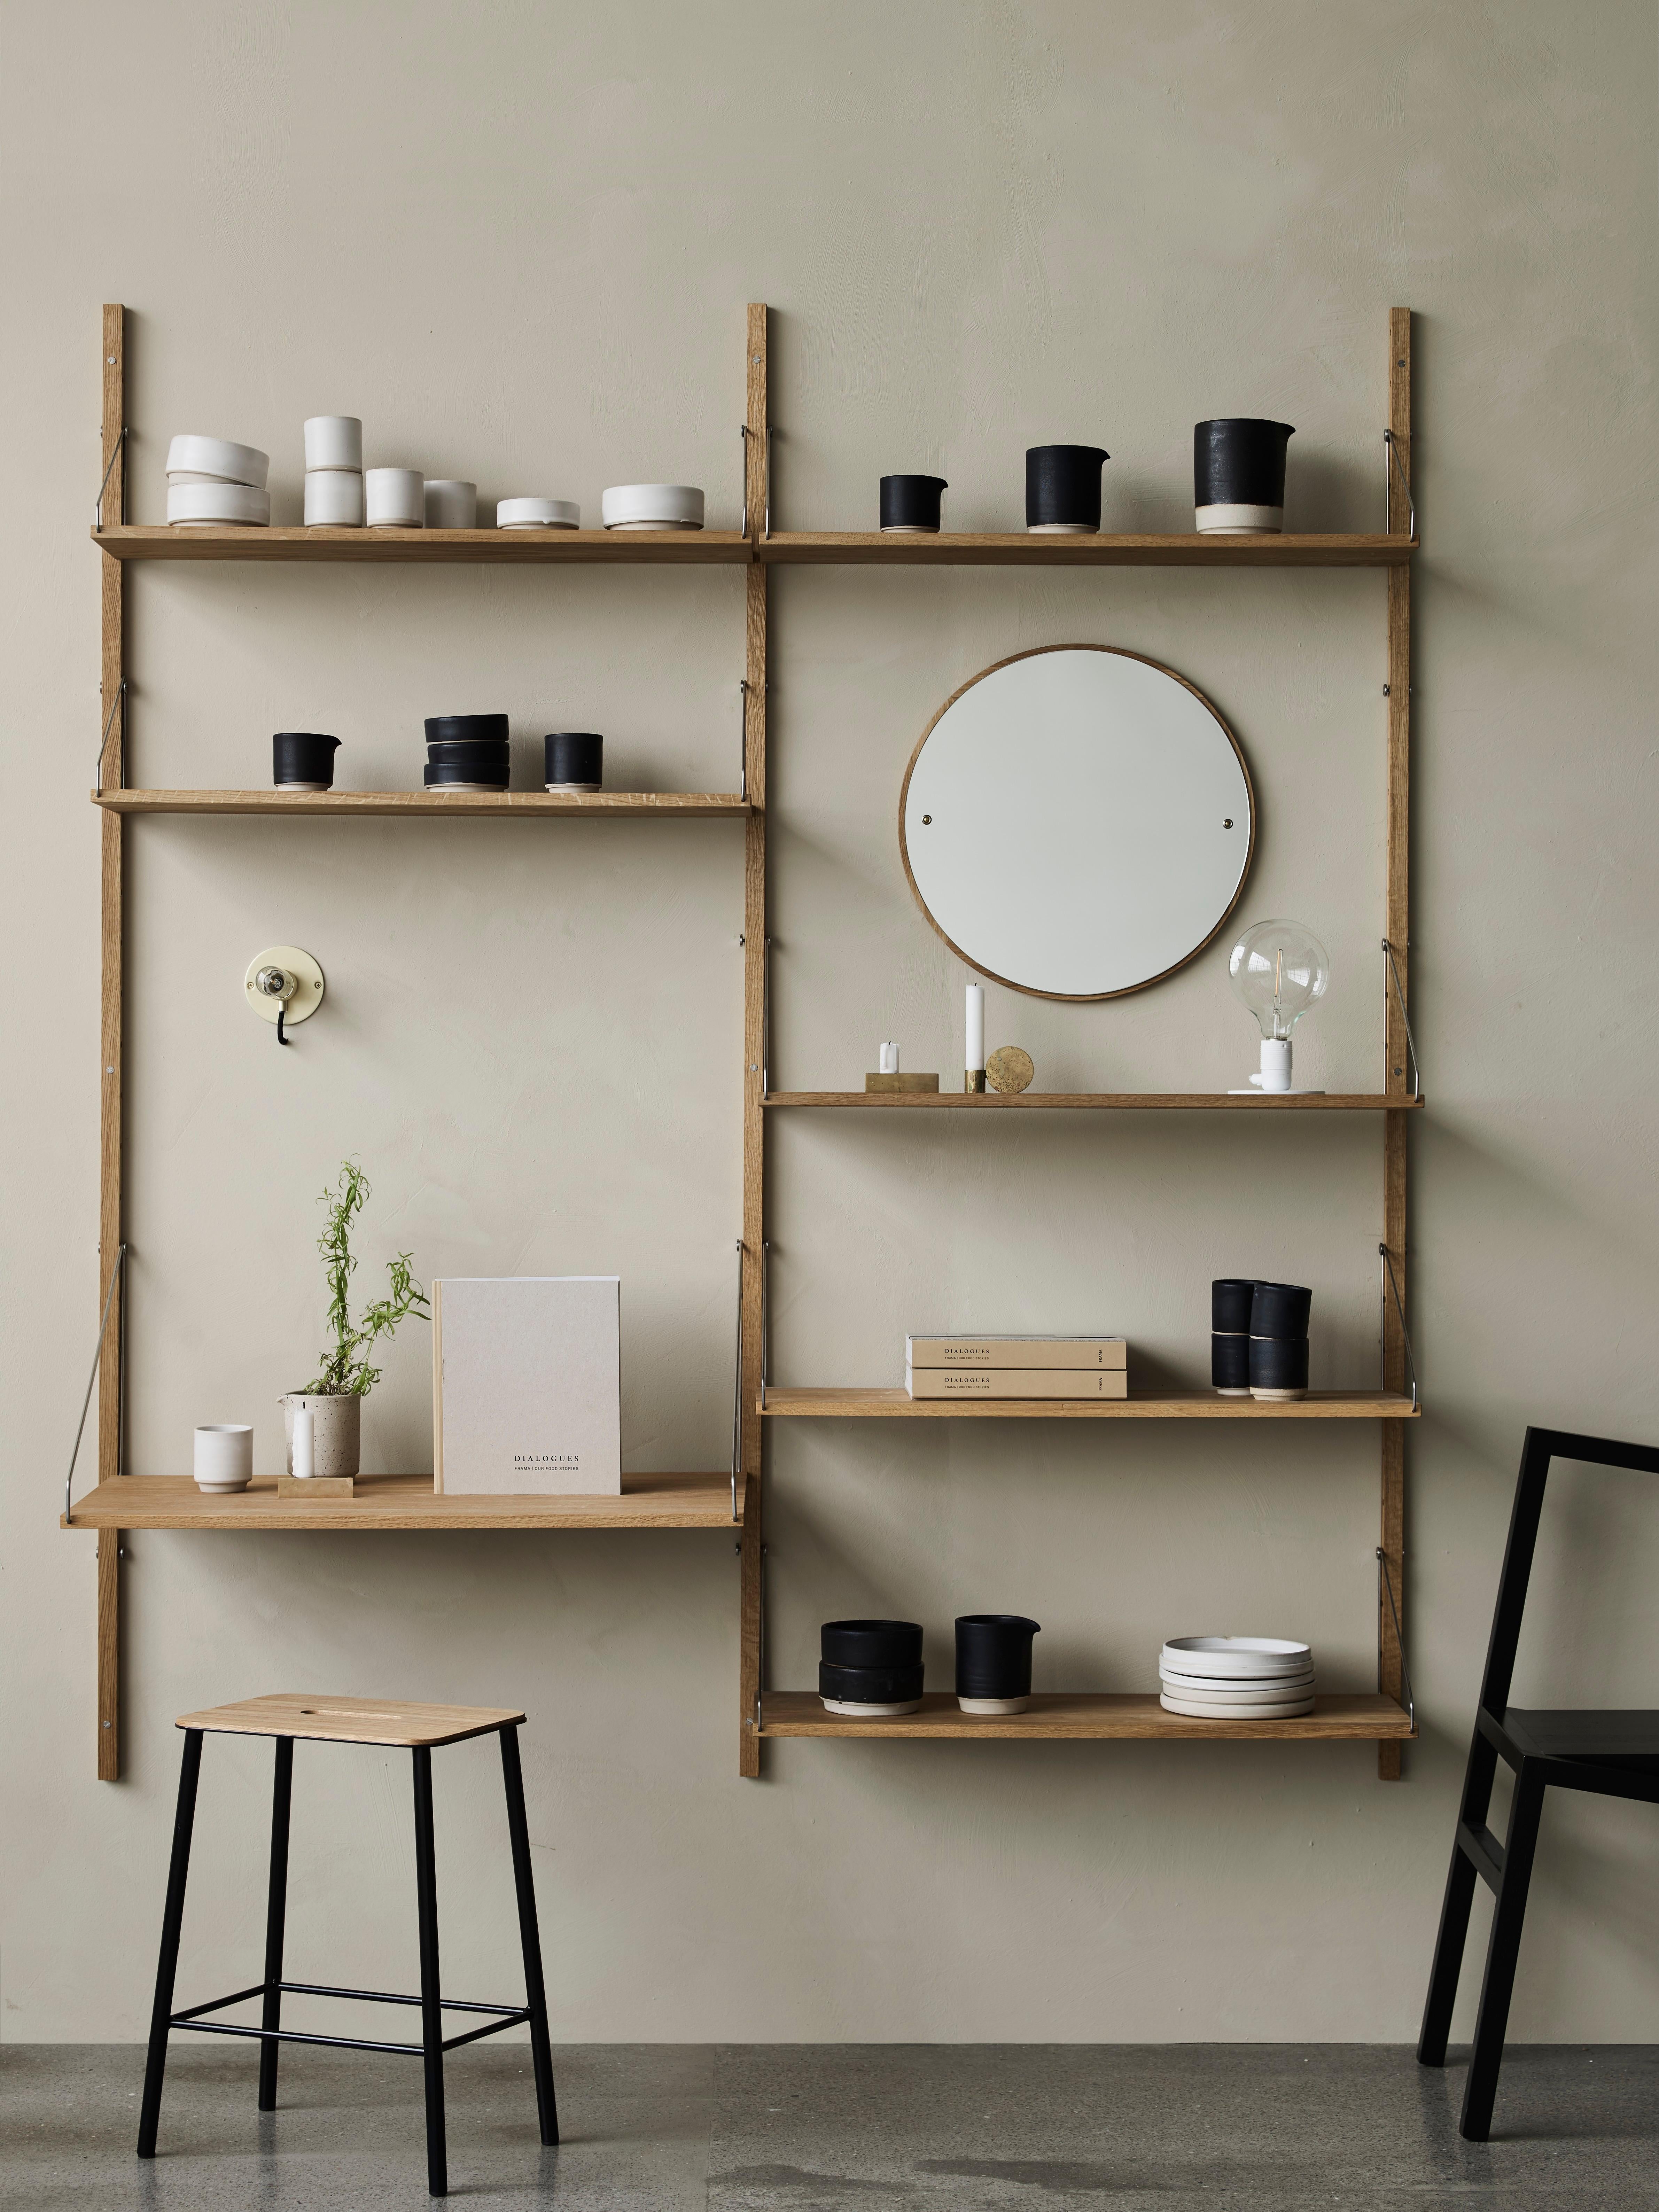 Shelf Library is a continuation of the recognised shelf design by Frama. Fastened with solid steel screws on oak rails, the shelves can easily be placed and re-styled in a variety of ways. The Desk Section can be used as a working spot, or as a